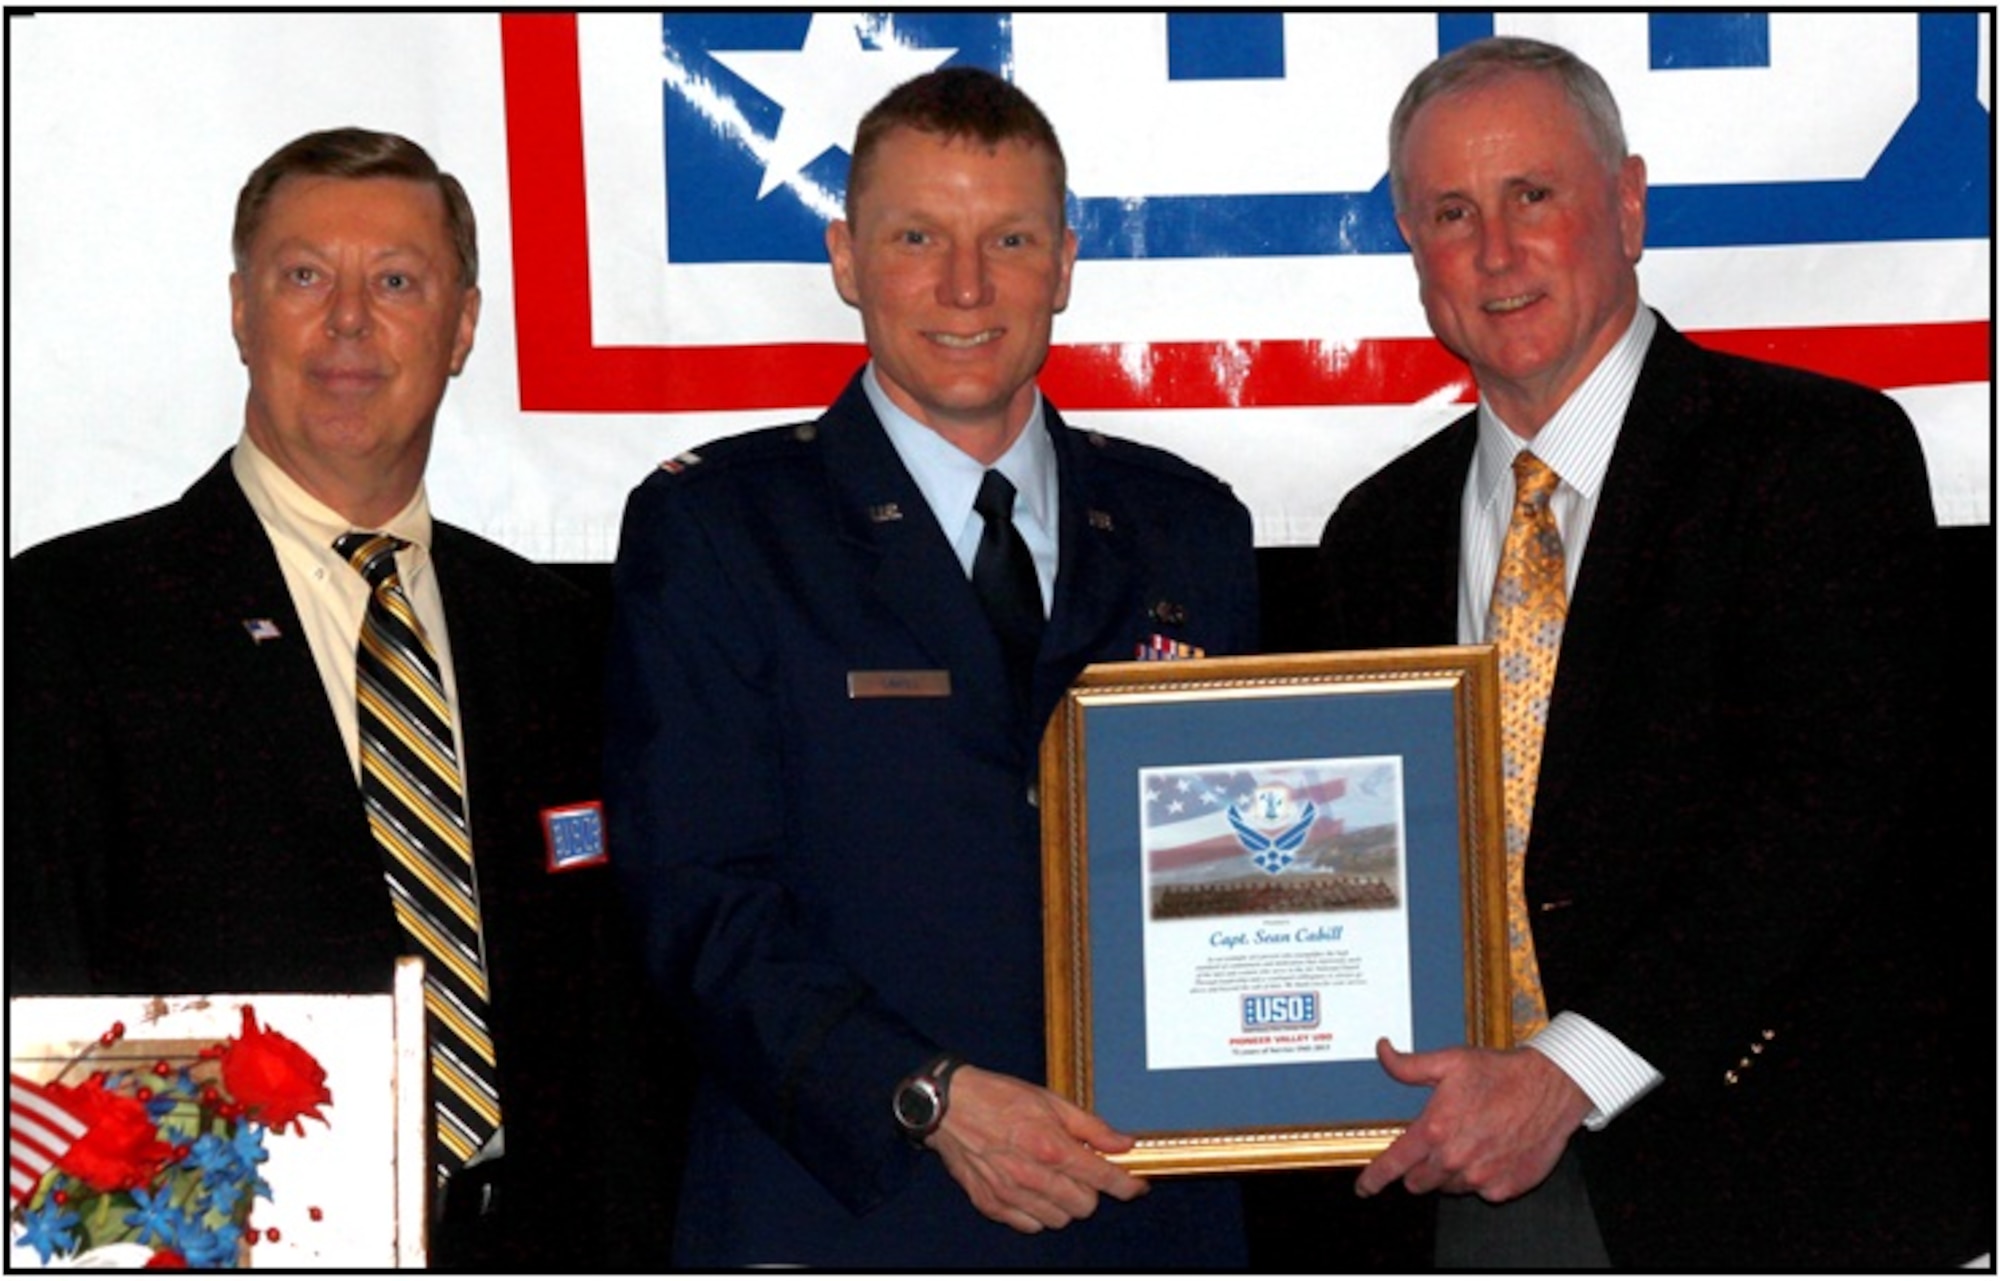 Mr. David Jubinville, the USO Board President stands with Capt. Cahill as Col. Tillman (ret)  presents the award. (Photograph by USO photographer Mr. Tom Overlock)
